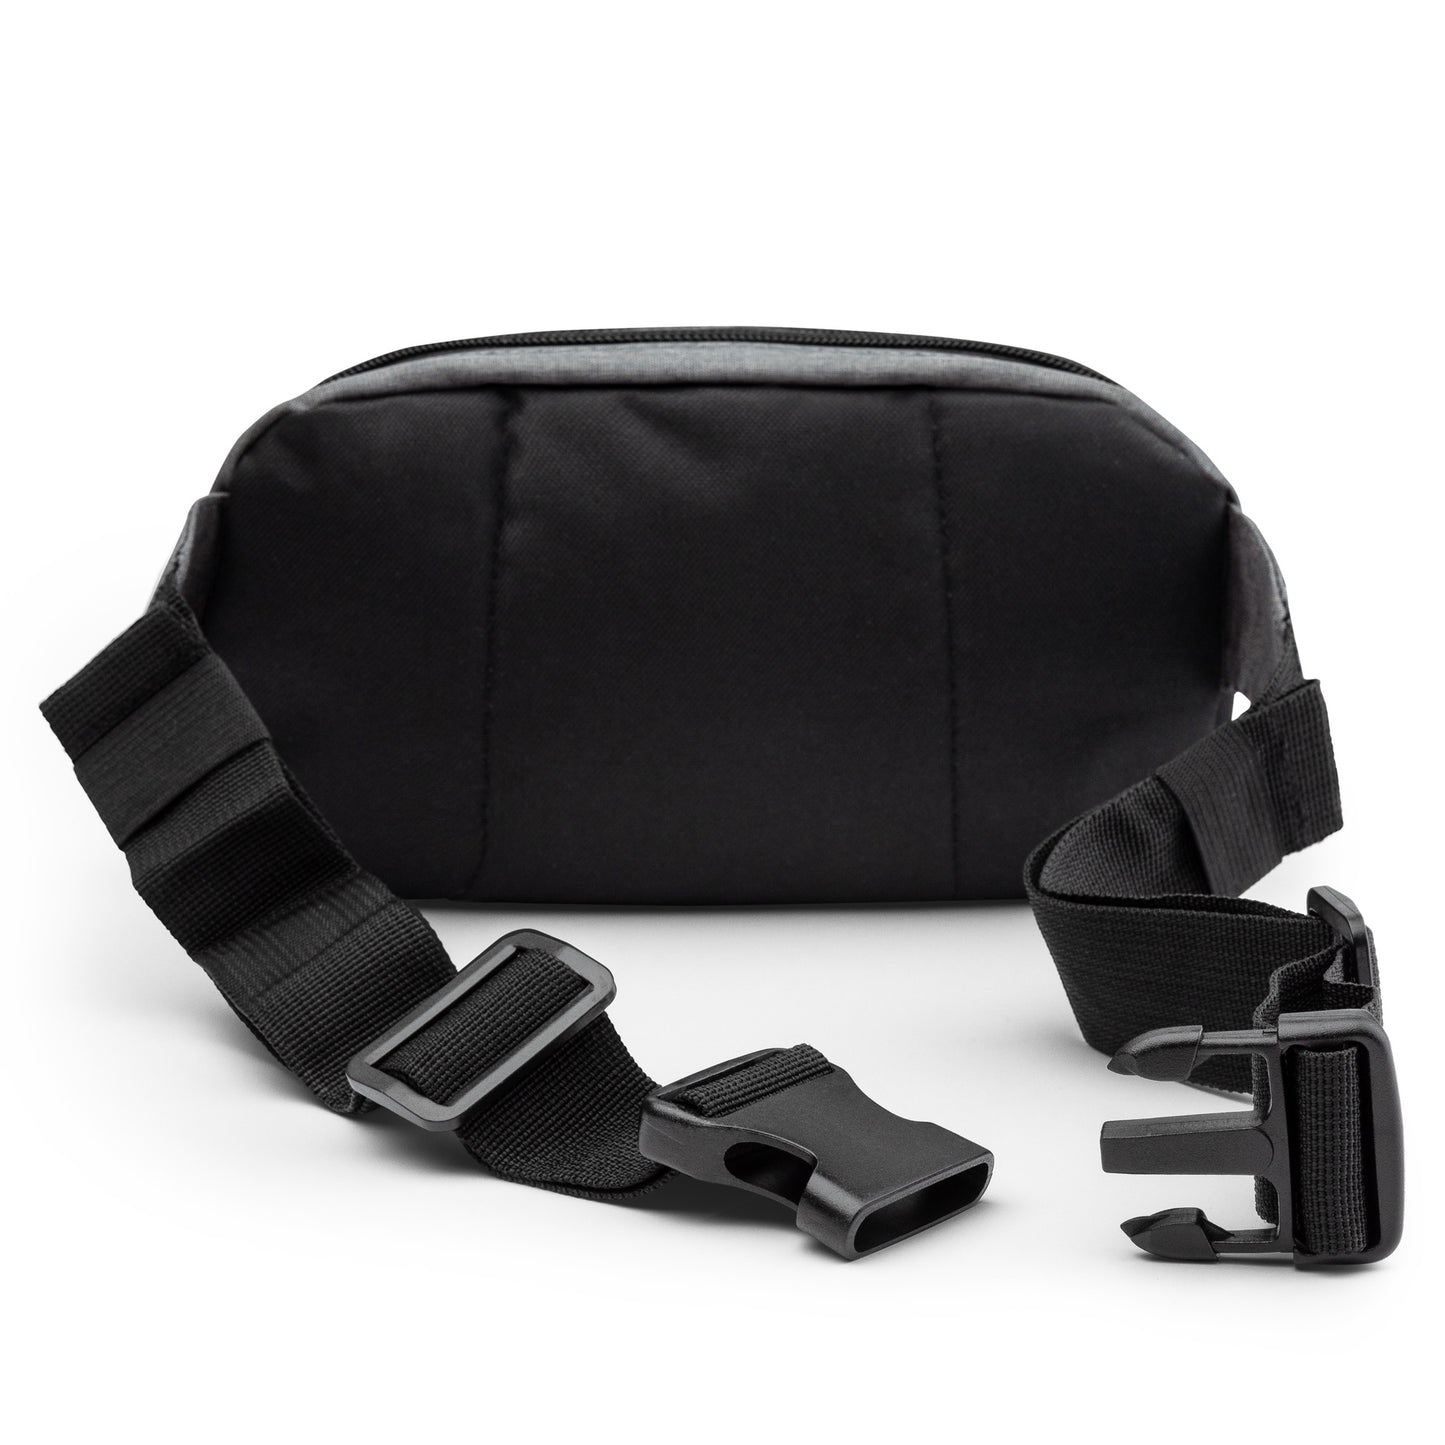 The Mean Extreme Trailblazer Fanny Pack